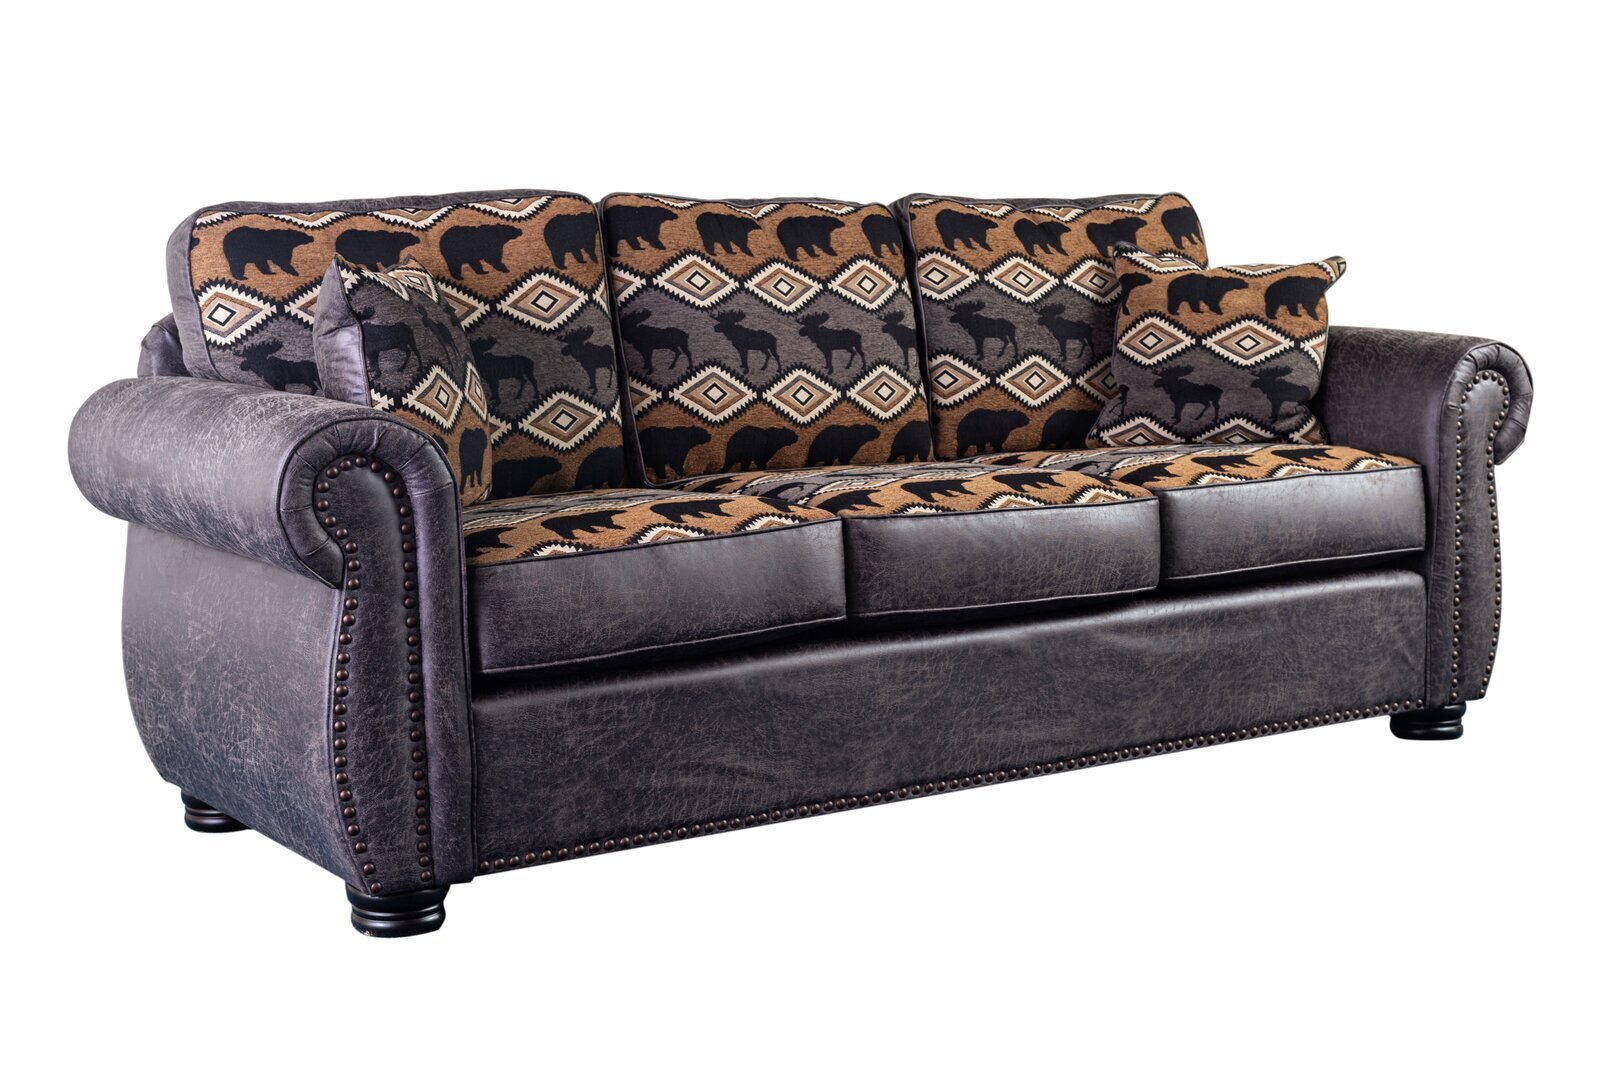 Mixed Material Leather Sofa With Nailhead Trim